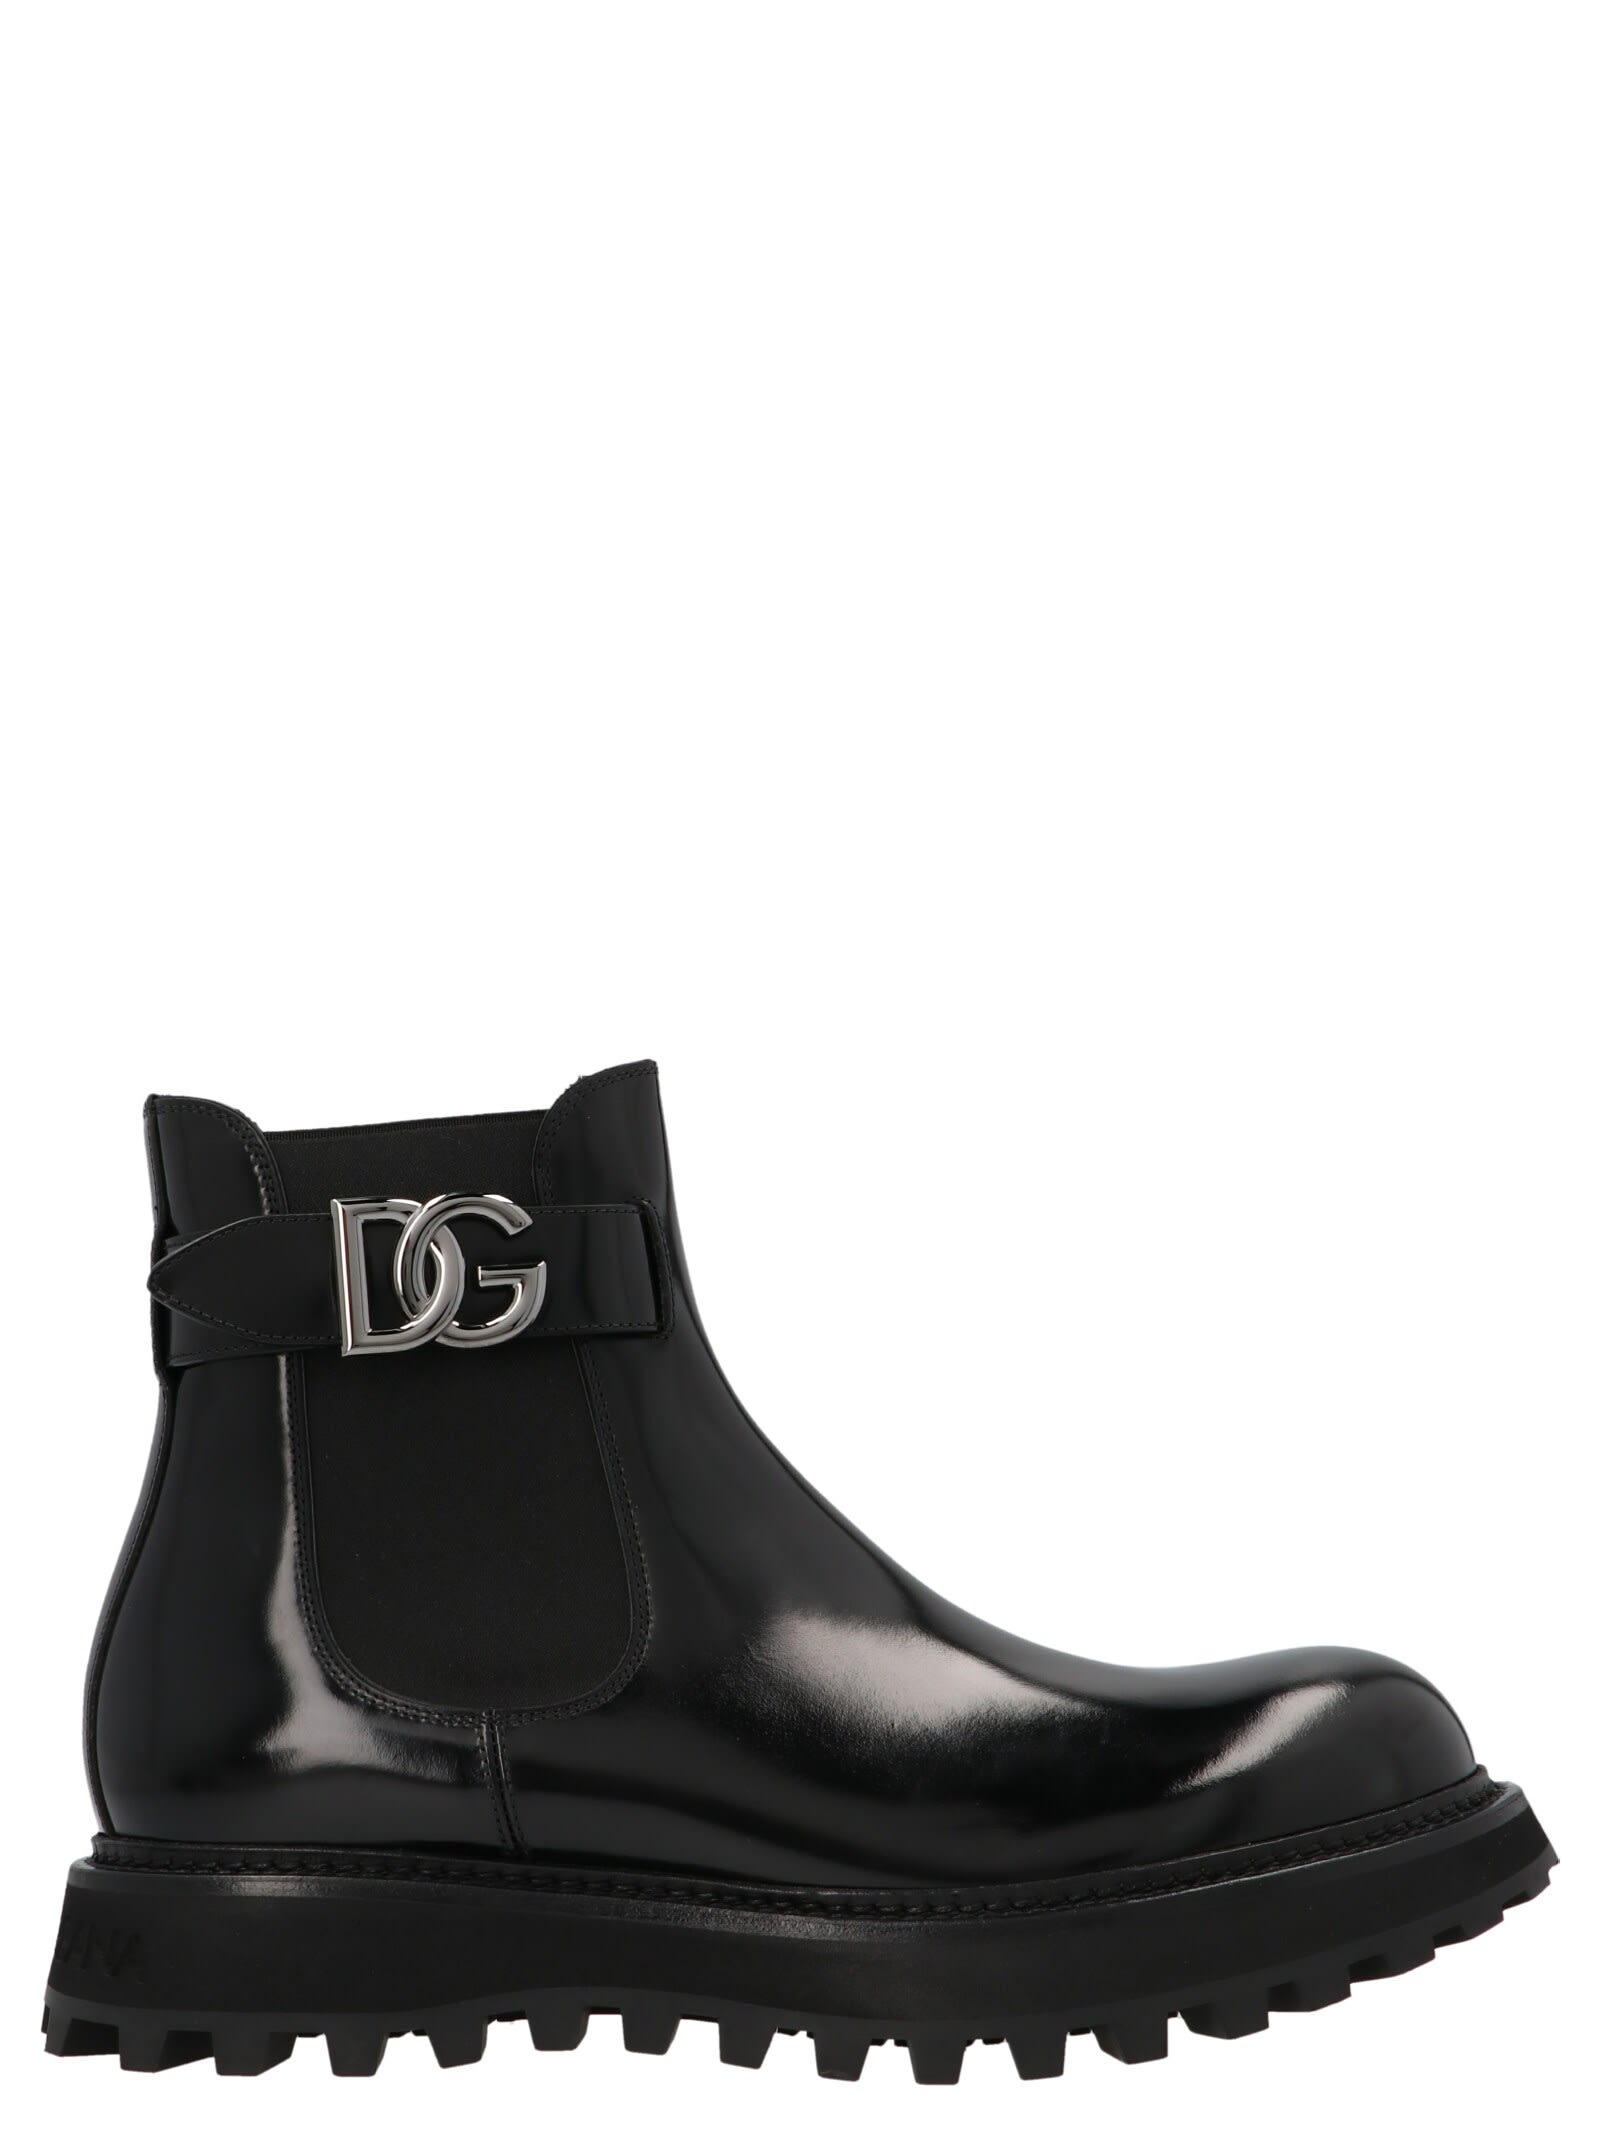 Dolce & Gabbana Brushed Beatle Boots